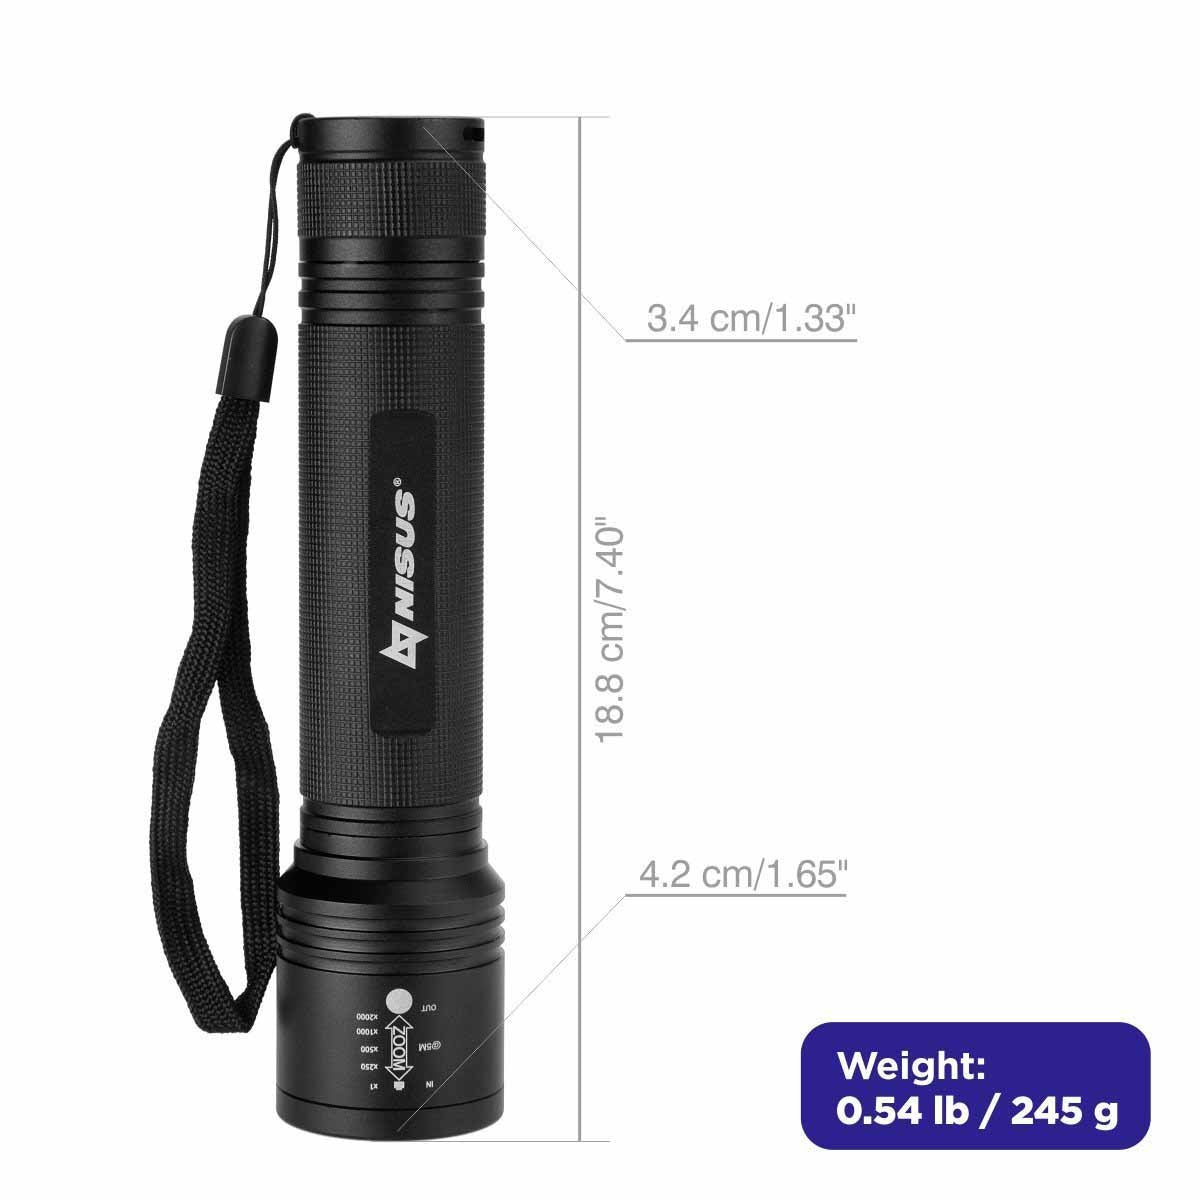 High-Powered LED Handheld Flashlight with Zoom is 40 inches long and weighs 0.54 lbs